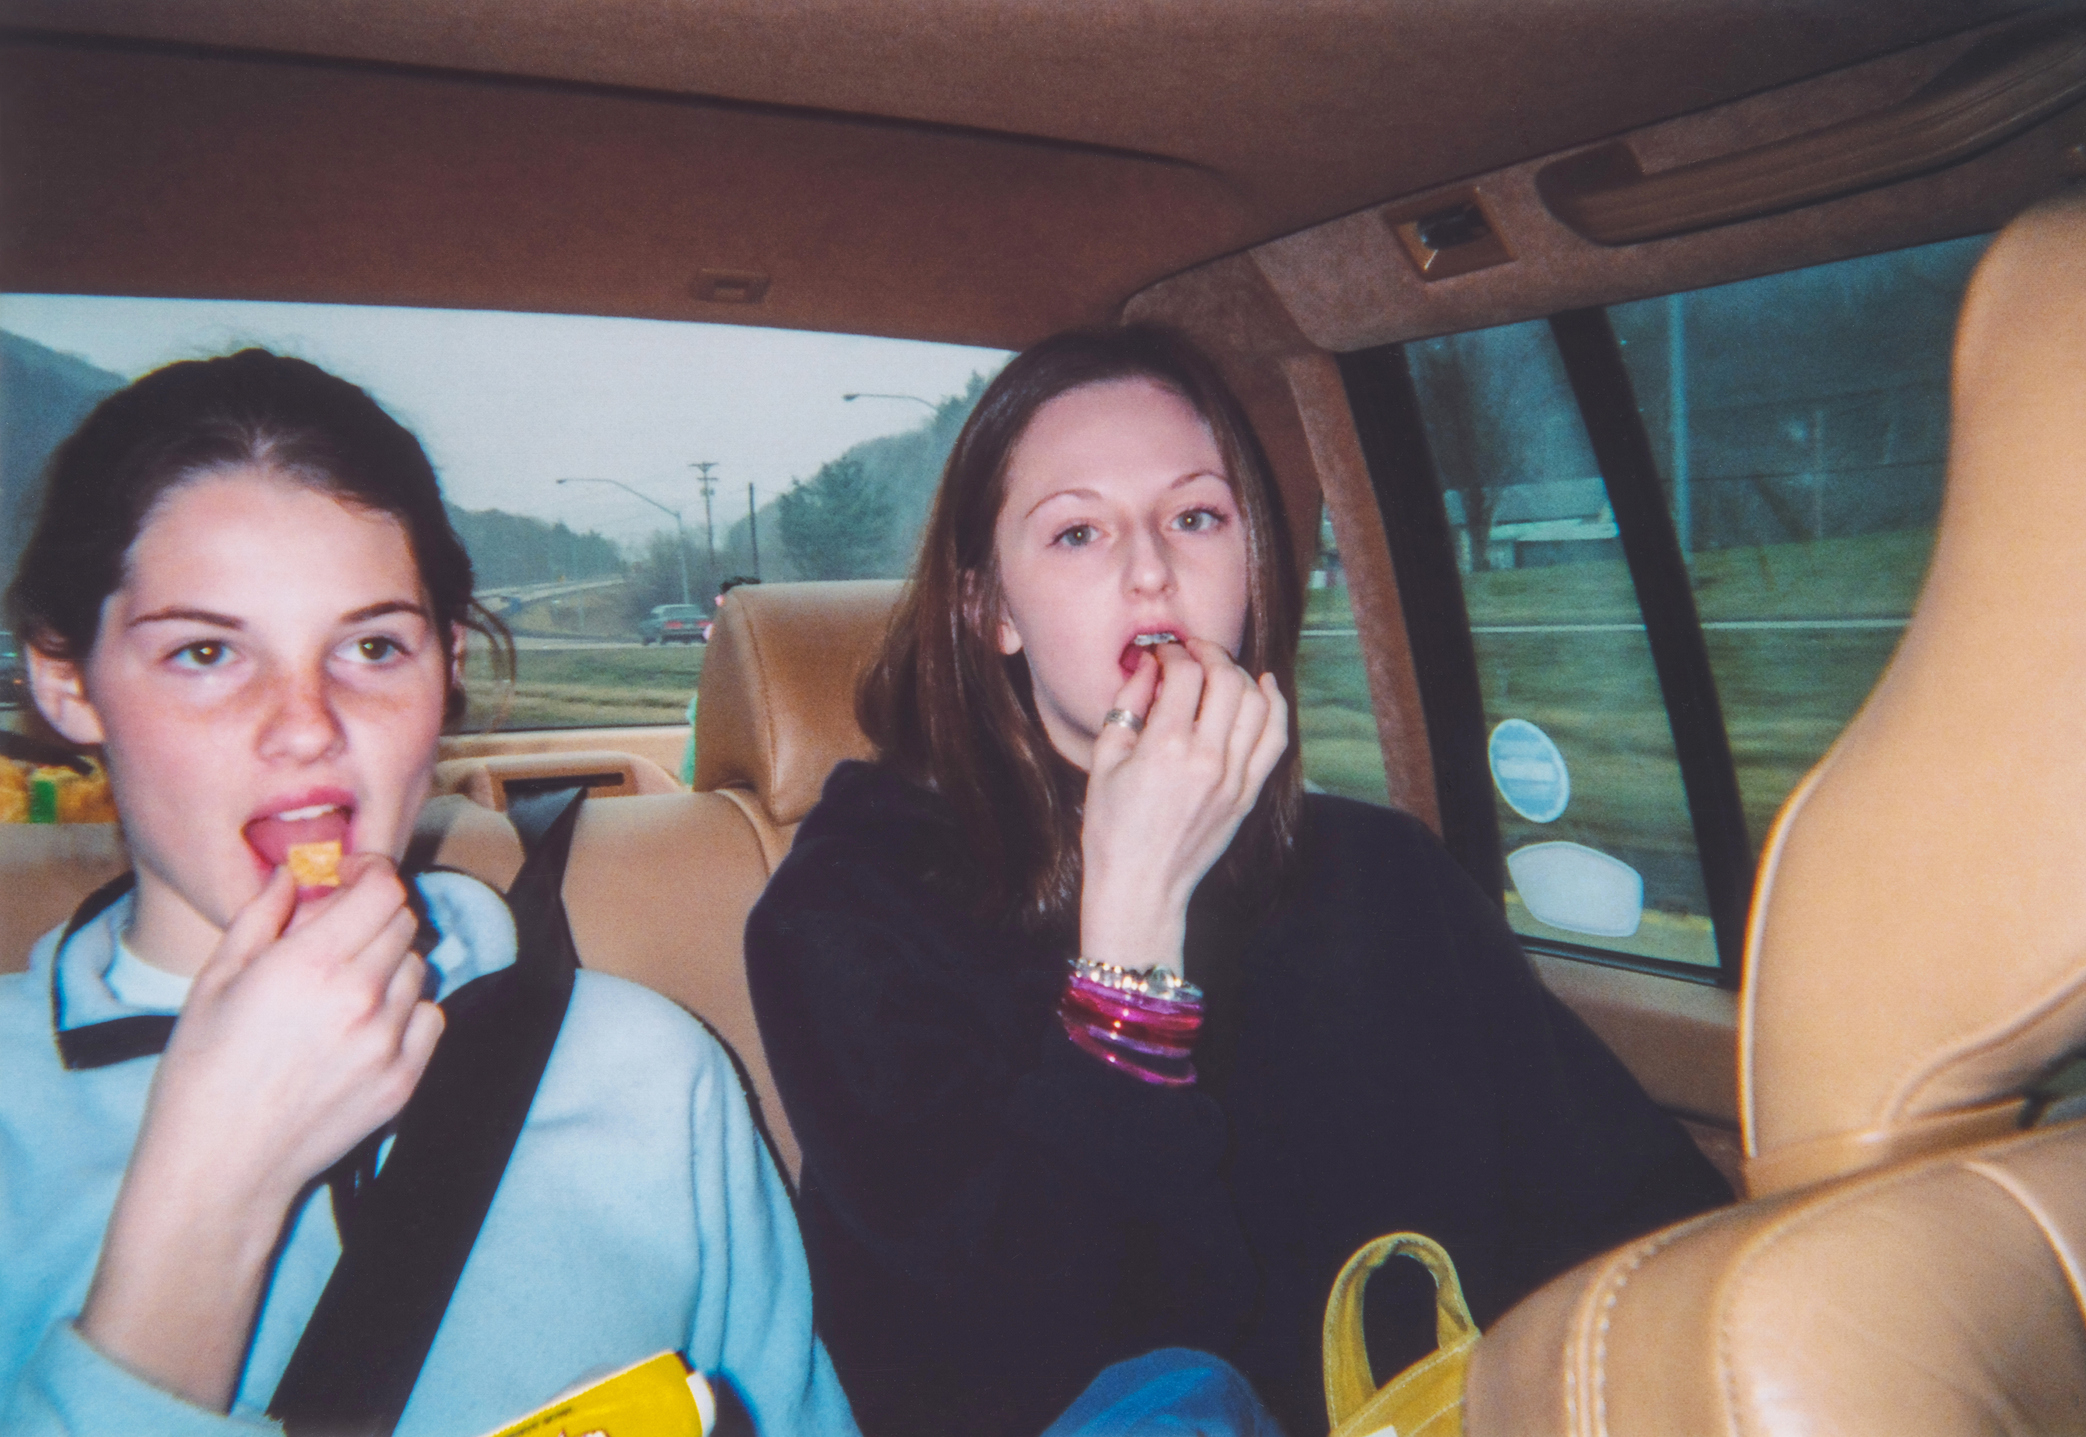 Two teenage girls in casual clothes eating snacks in the backseat of a car